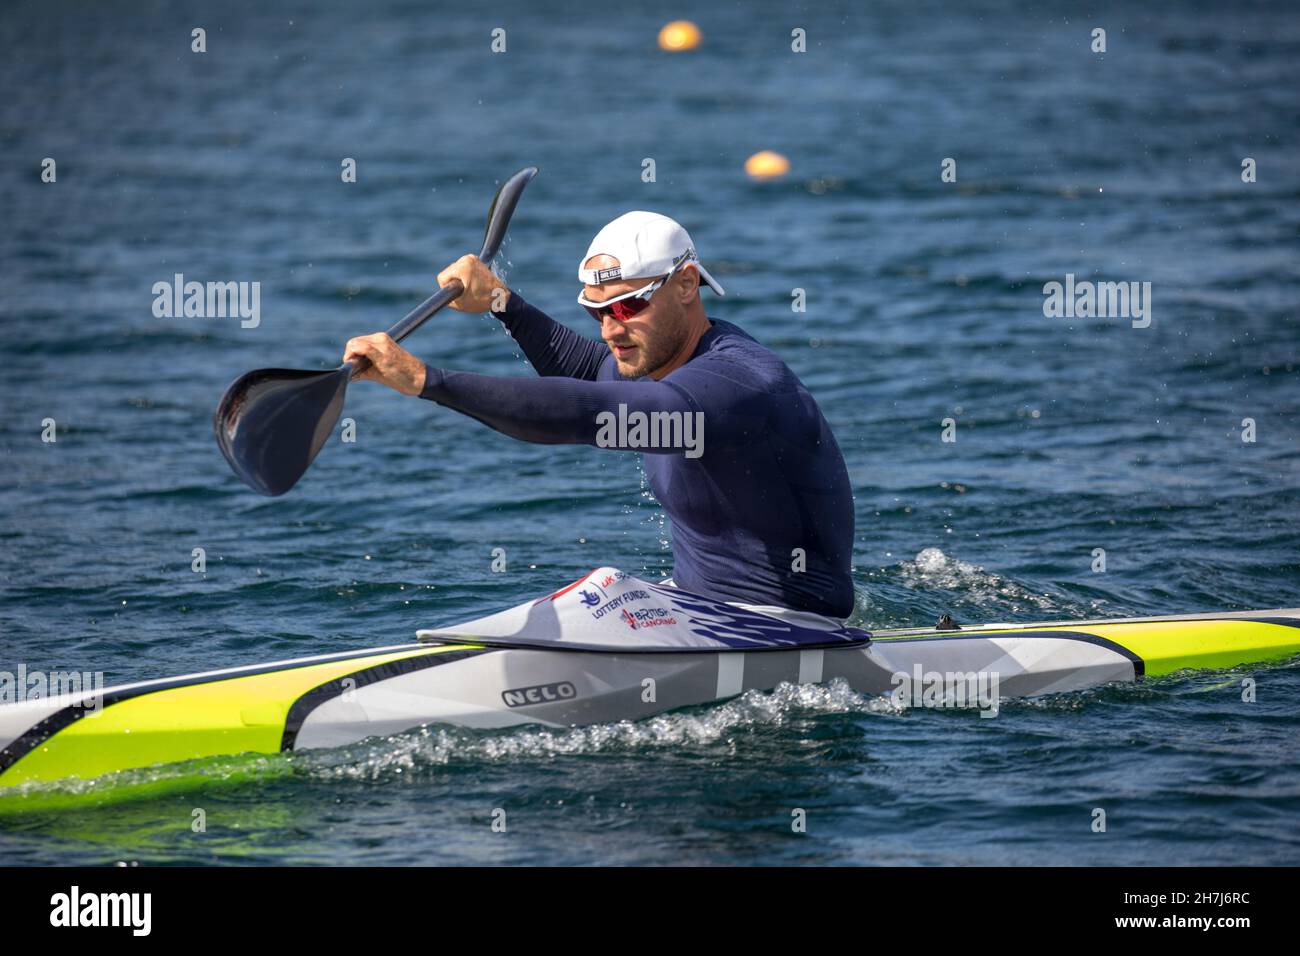 British sprint canoeist and multiple Olympic medalist Liam Heath, MBE, training on the 26th August 2020 at Dorney Lake in the United Kingdom. Liam is Stock Photo